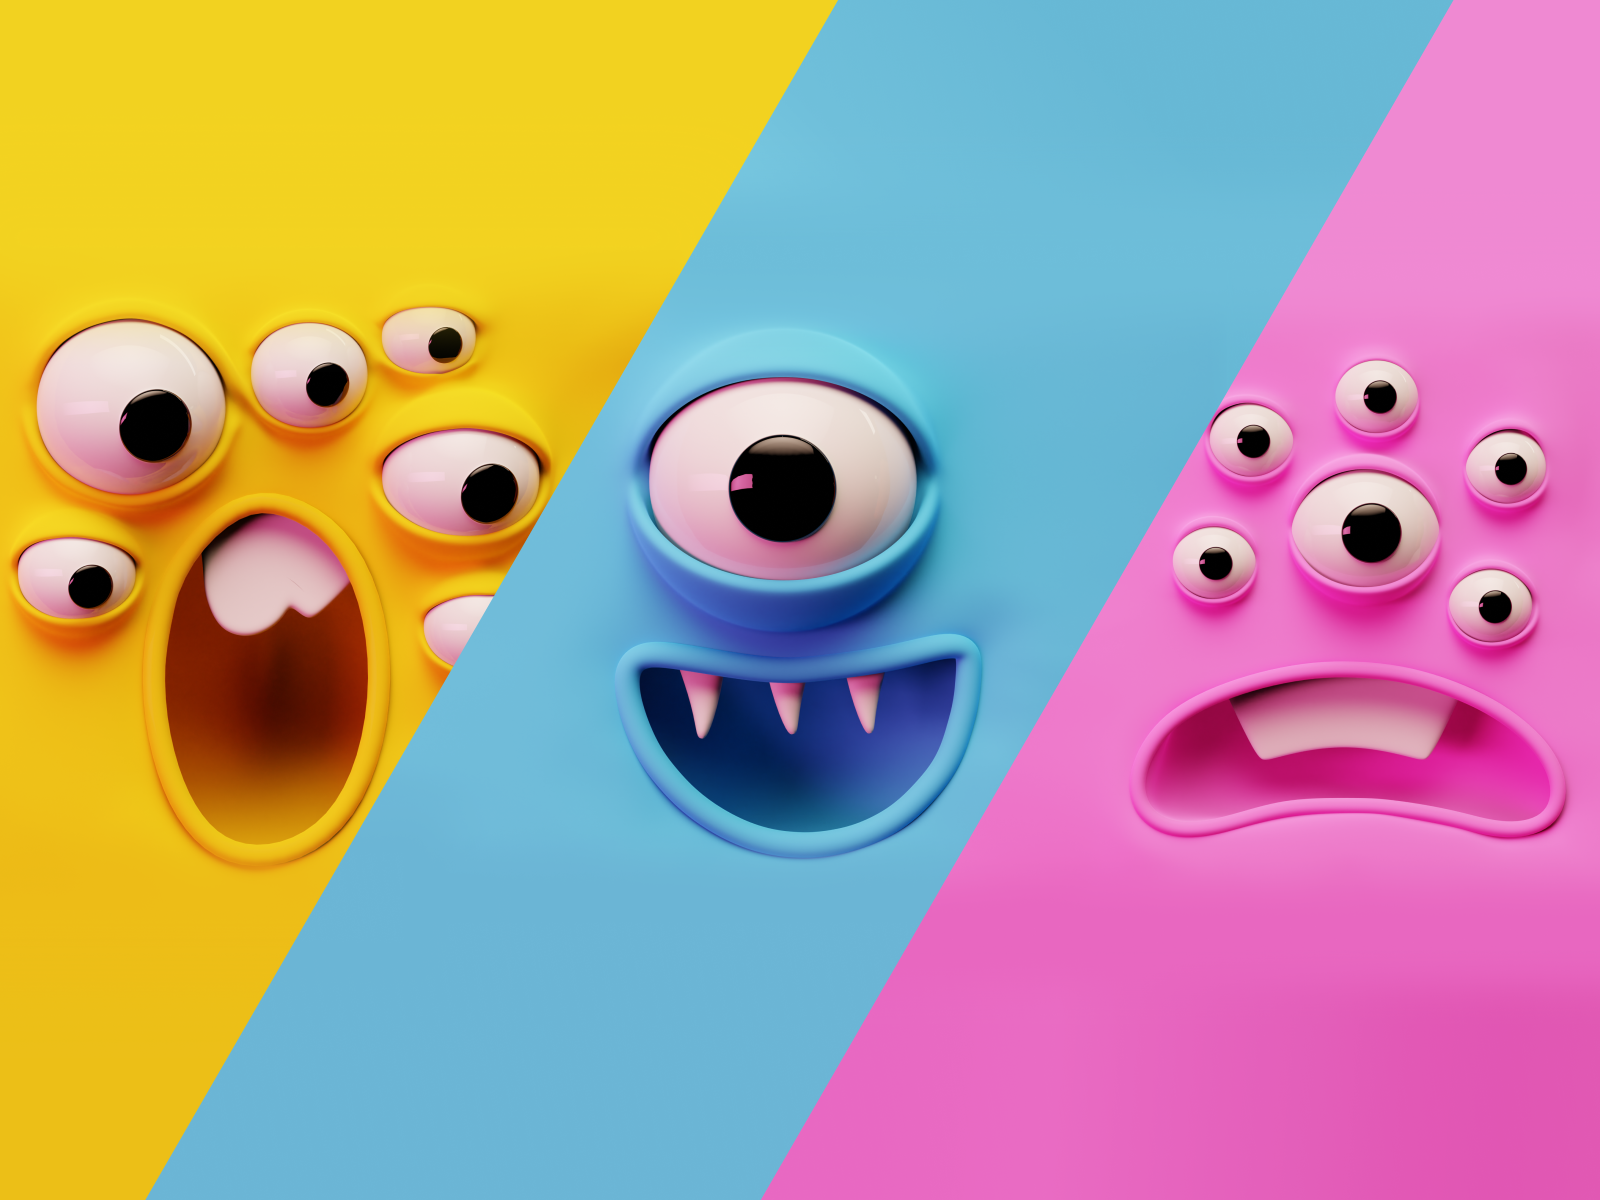 Monsterface Expression 3D Ver 2 by 300Mind Gaming for 300Mind on Dribbble